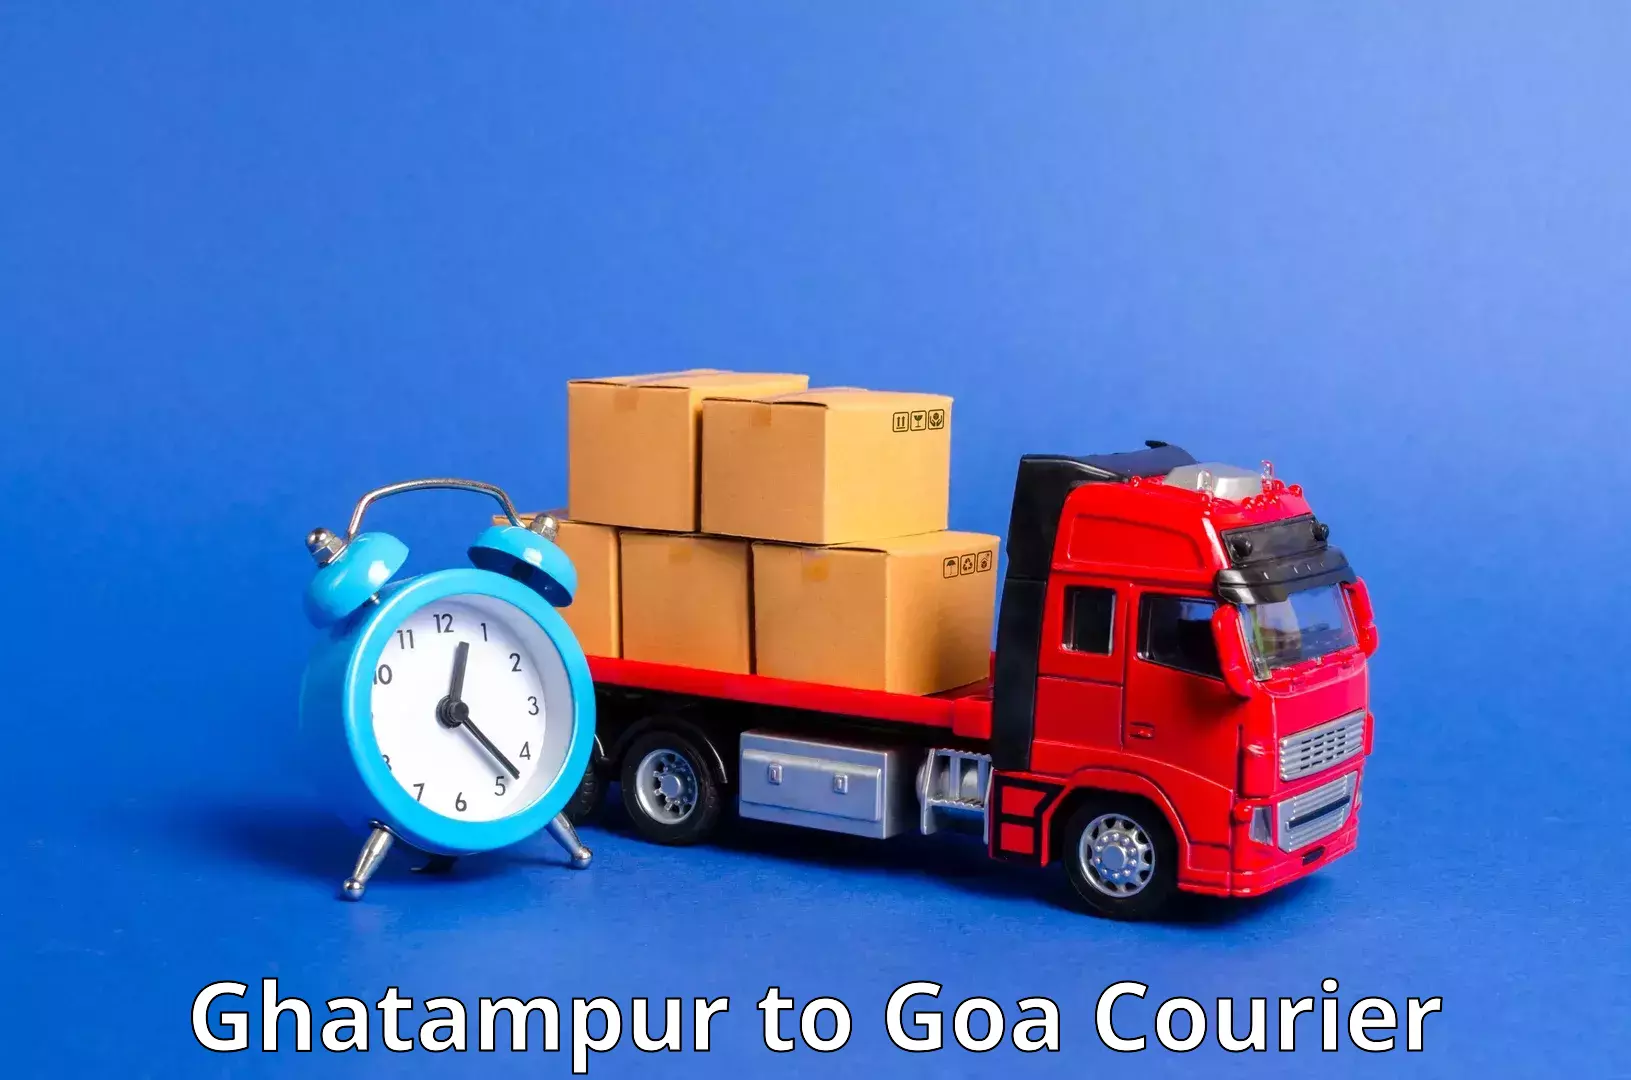 Nationwide delivery network Ghatampur to Goa